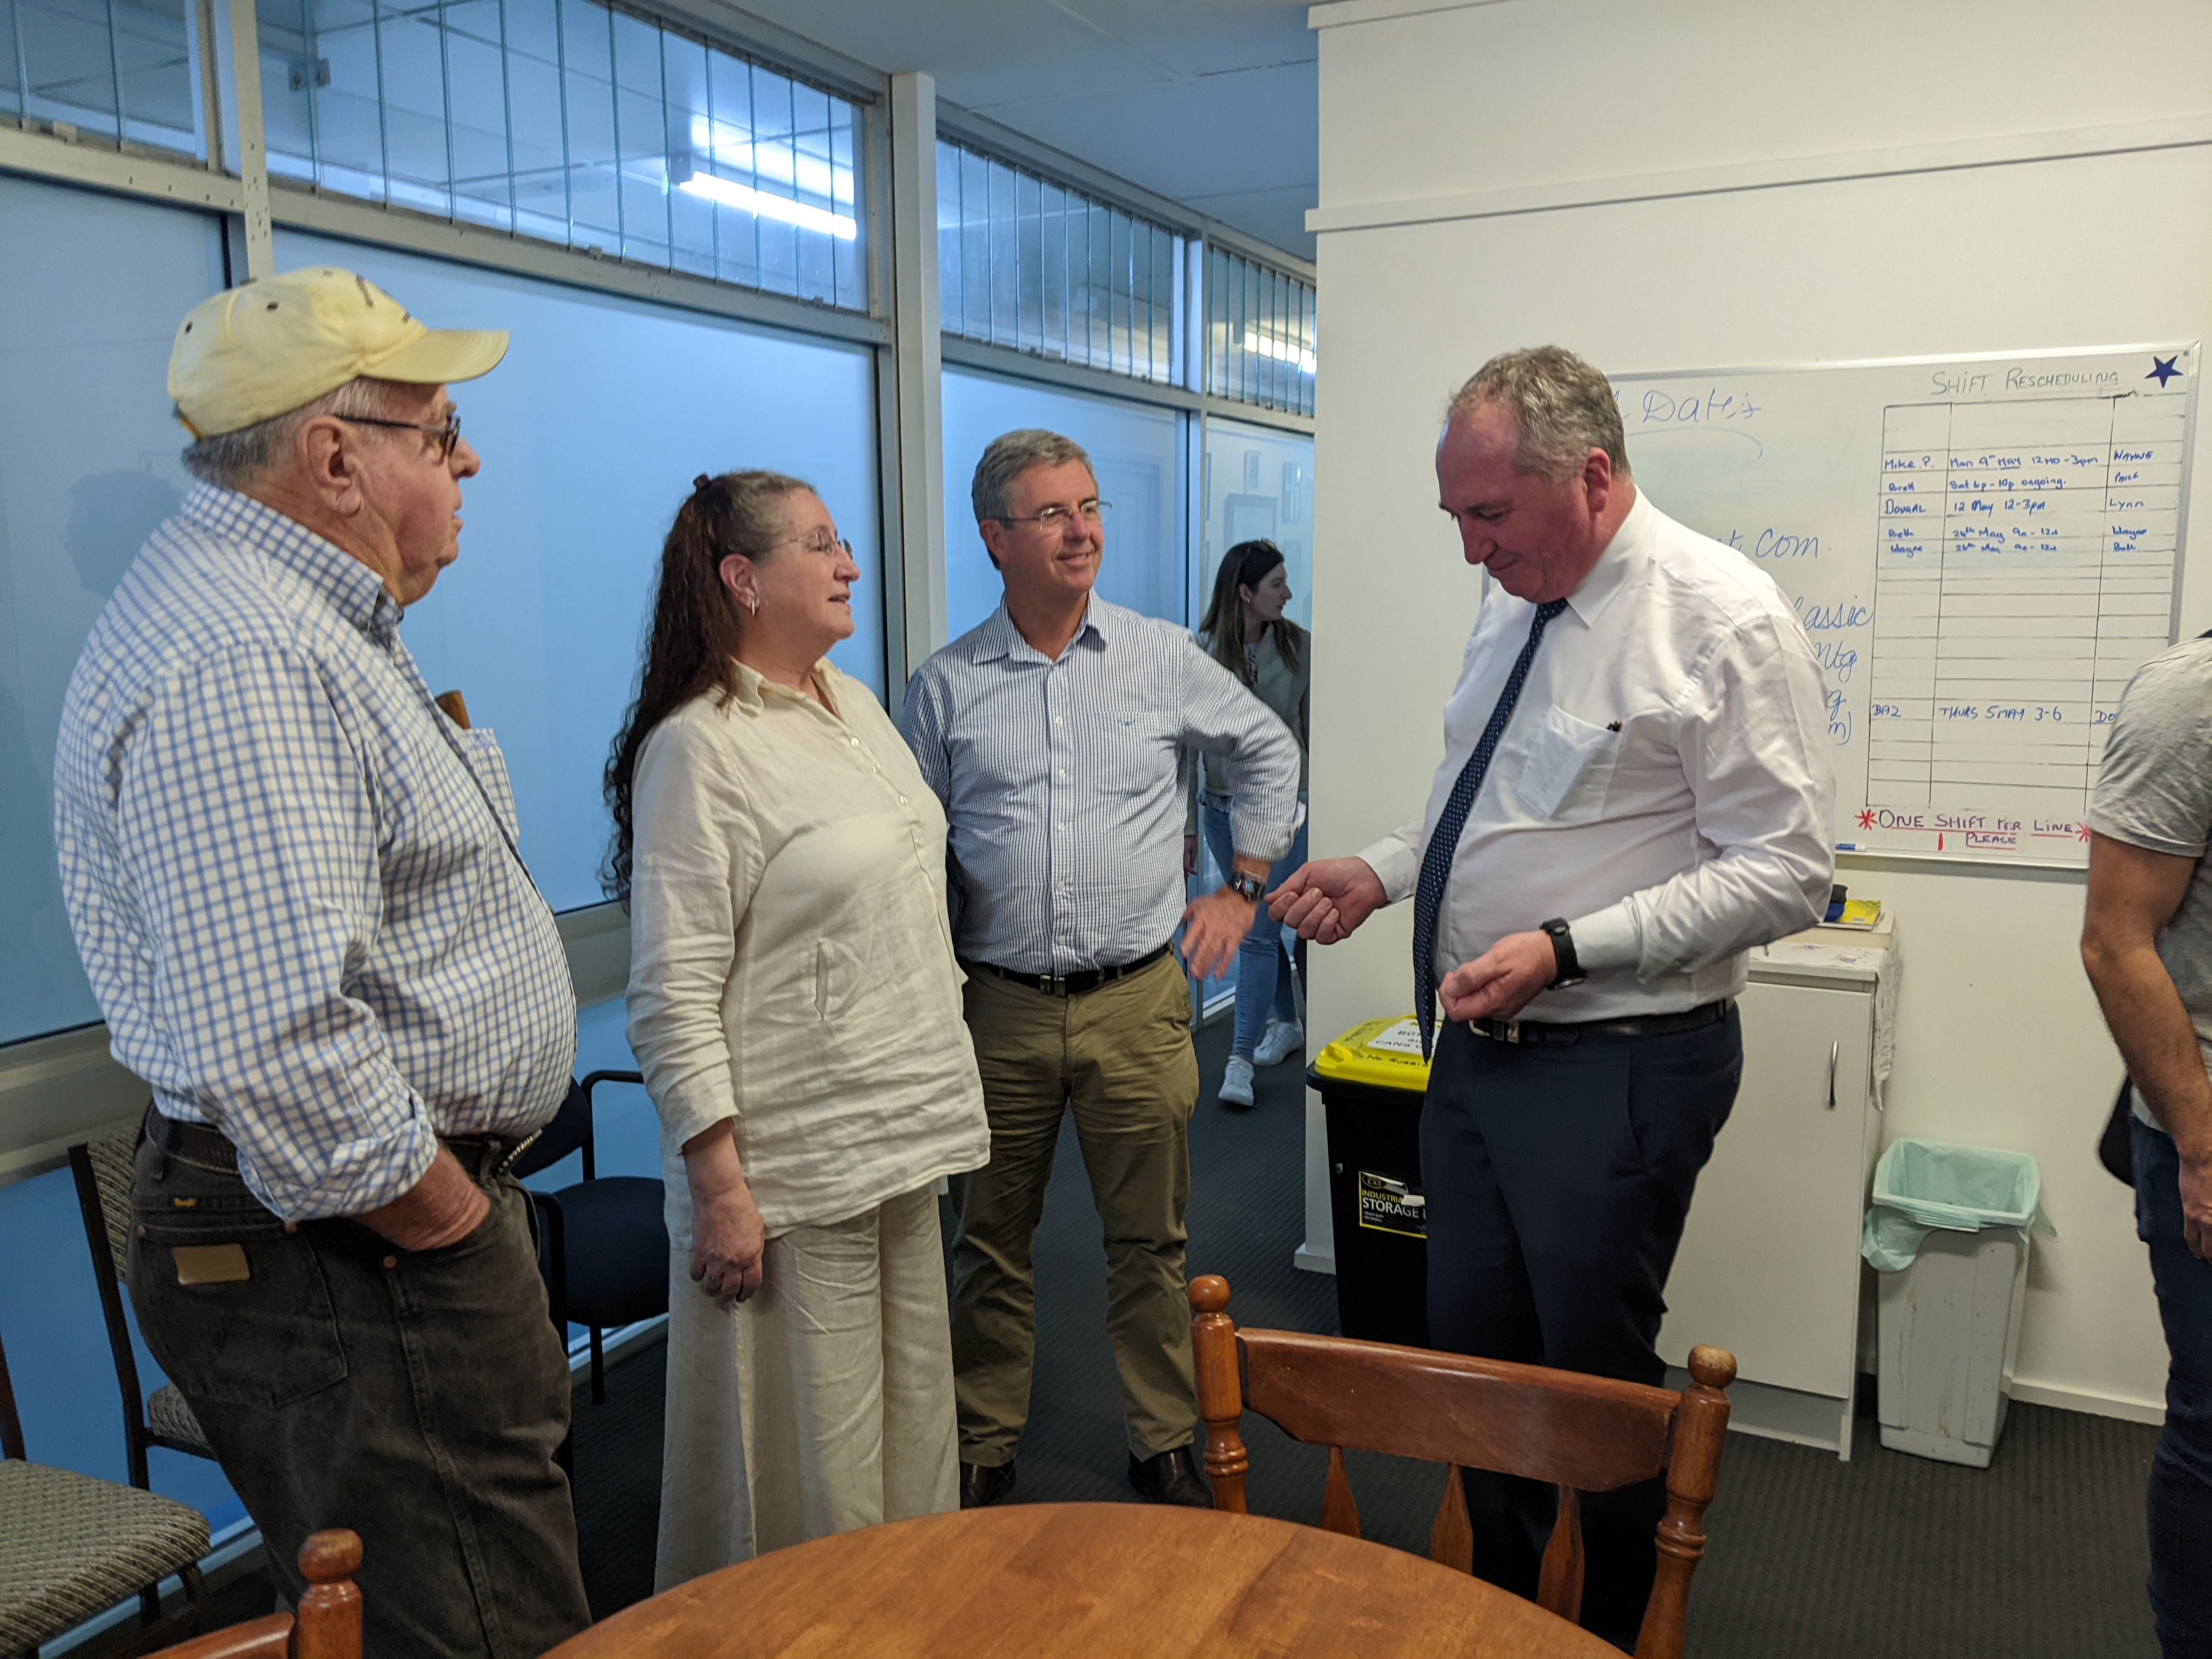 Barnaby Joyce talks to a group of people